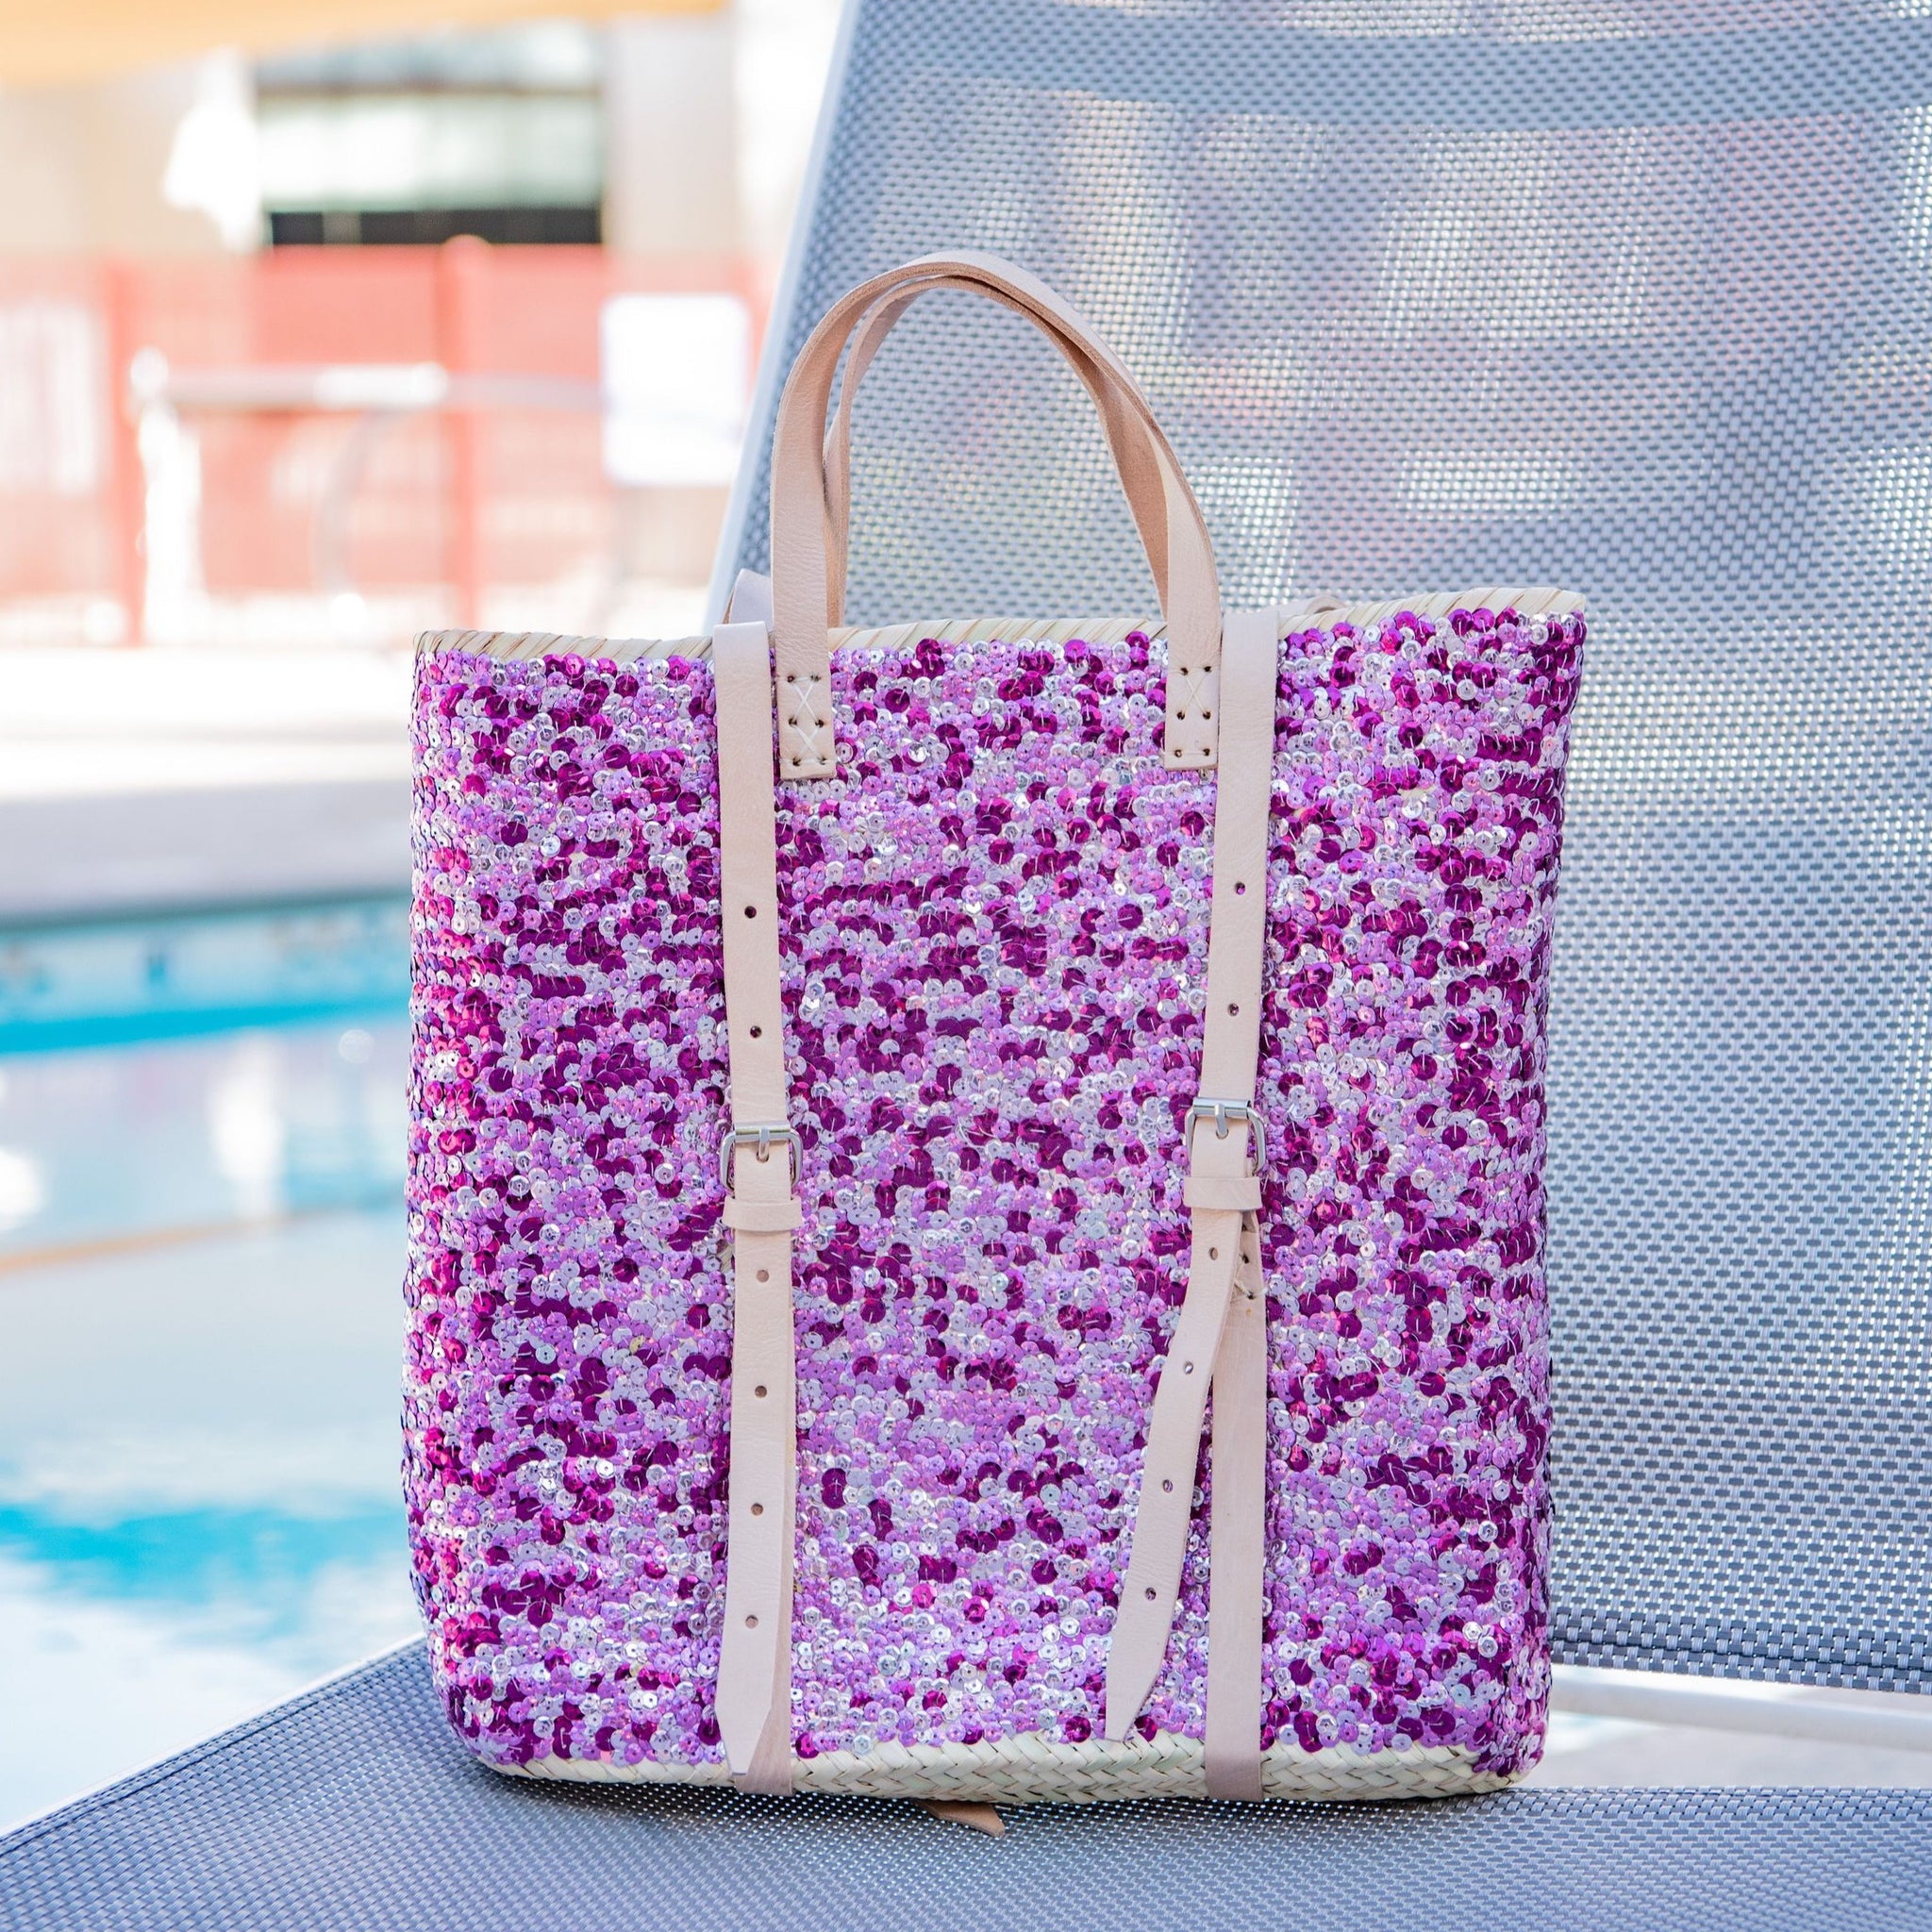 Straw backpack with purple sequins sitting on pool chair